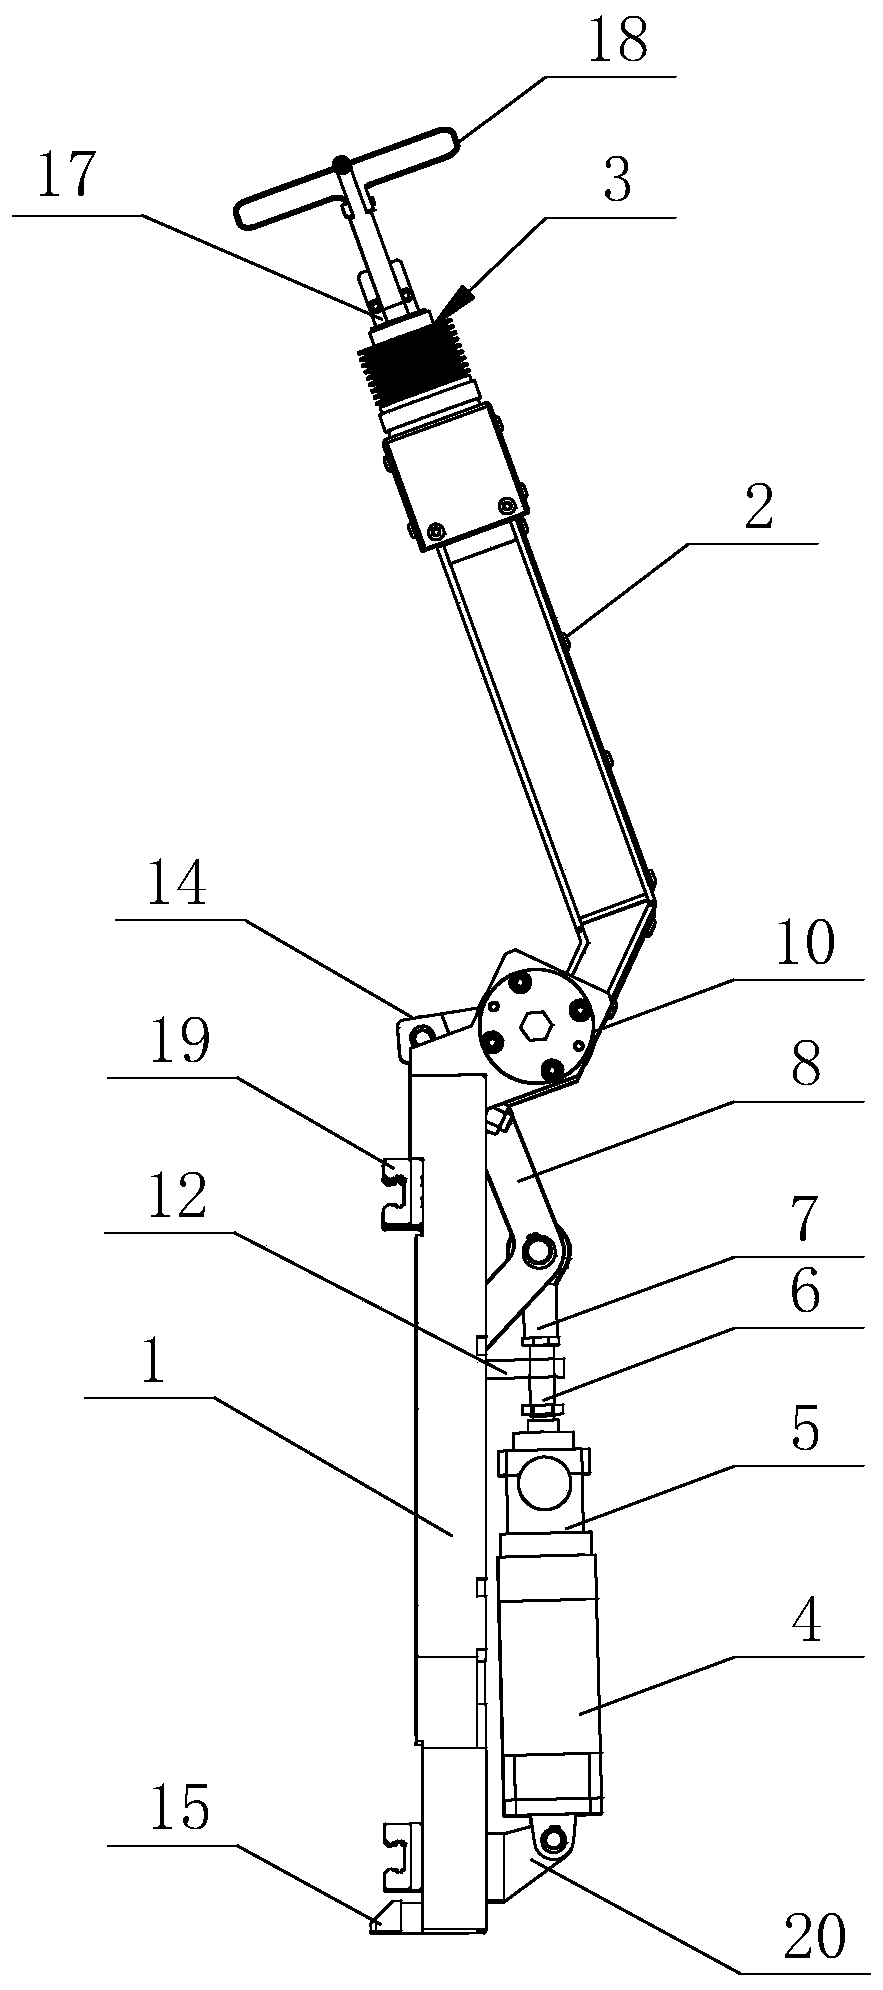 Locking assembly of pneumatic measurement device